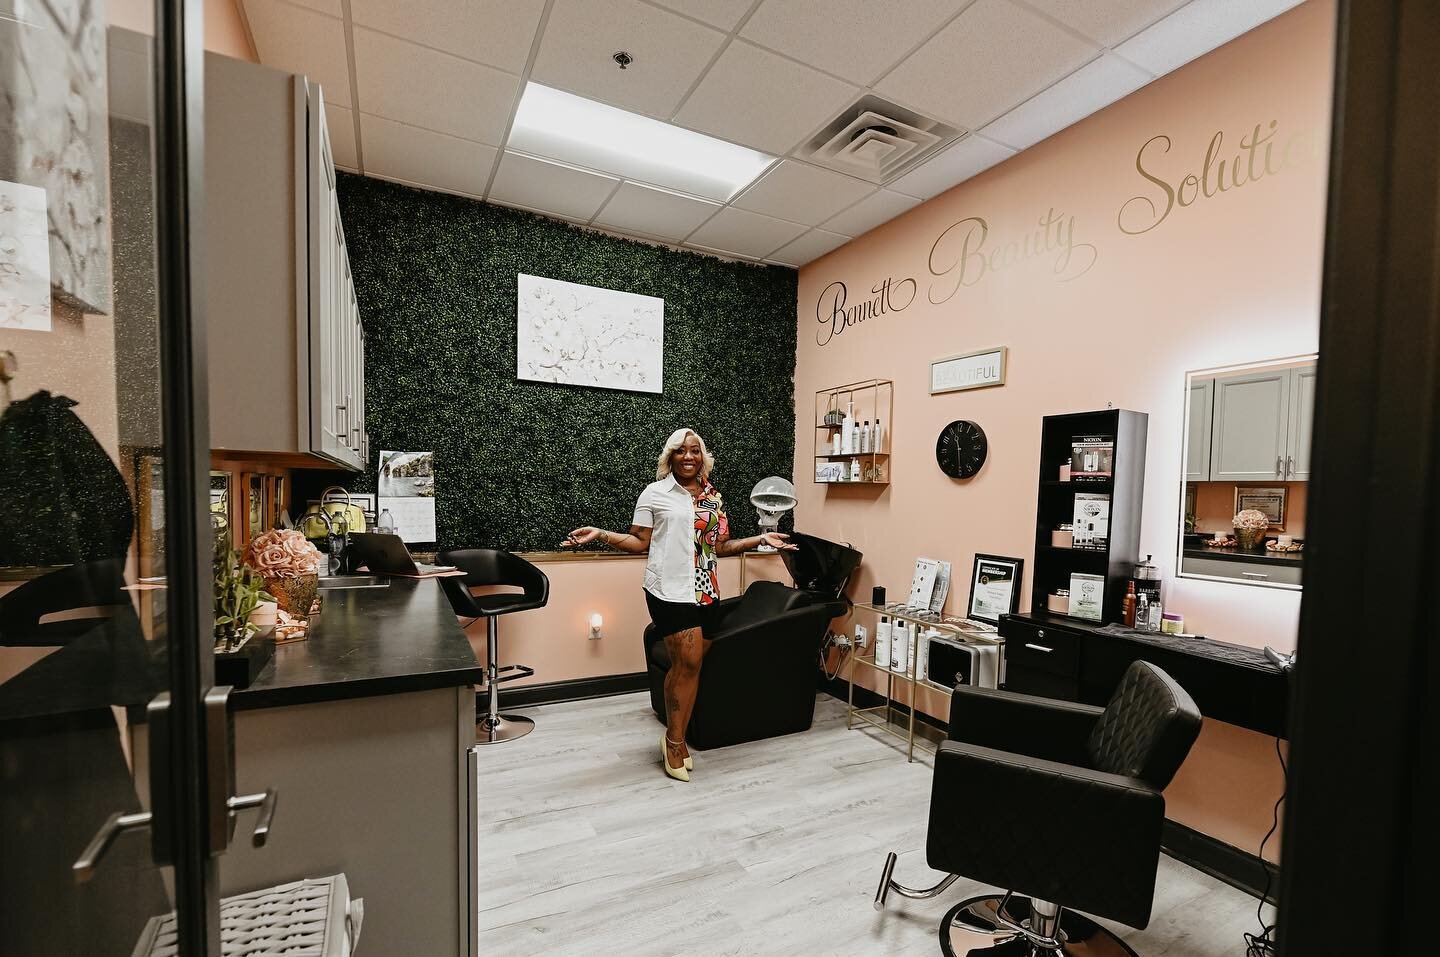 Lux Salon Suites gives you the ability to be creative with your style! Choose your color scheme and make it your own! We are loving this vibe!
&bull;
&bull;
&bull;
&bull;
&bull;
&bull;
&bull;
&bull;
#luxsalonsuites #hairstyles #salonprofessional #cos